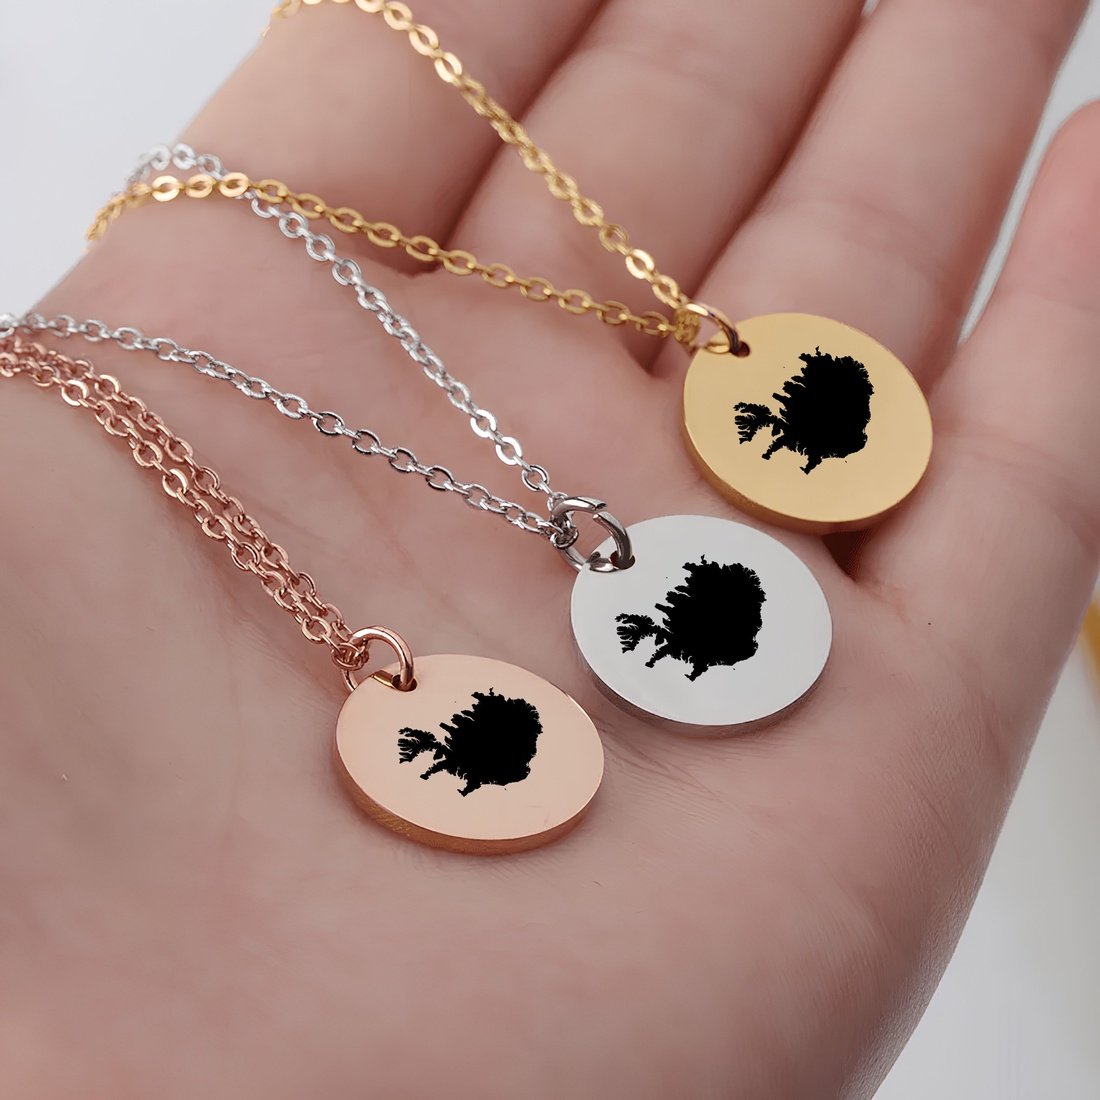 Iceland Country Map Necklace - Personalizable Jewelry